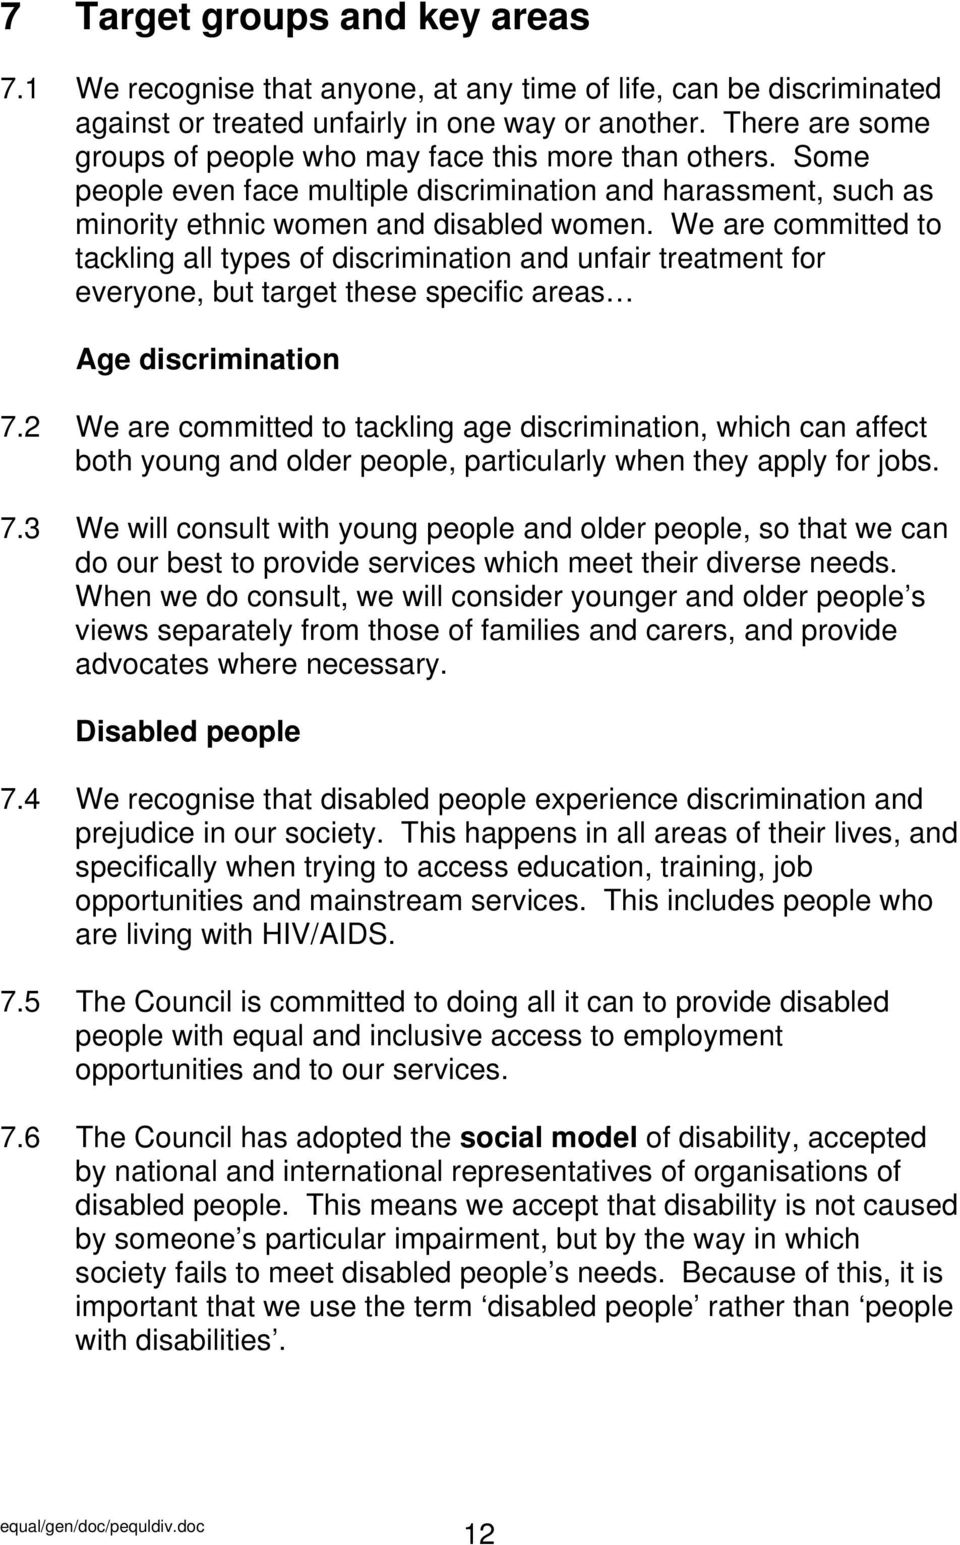 We are committed to tackling all types of discrimination and unfair treatment for everyone, but target these specific areas Age discrimination 7.